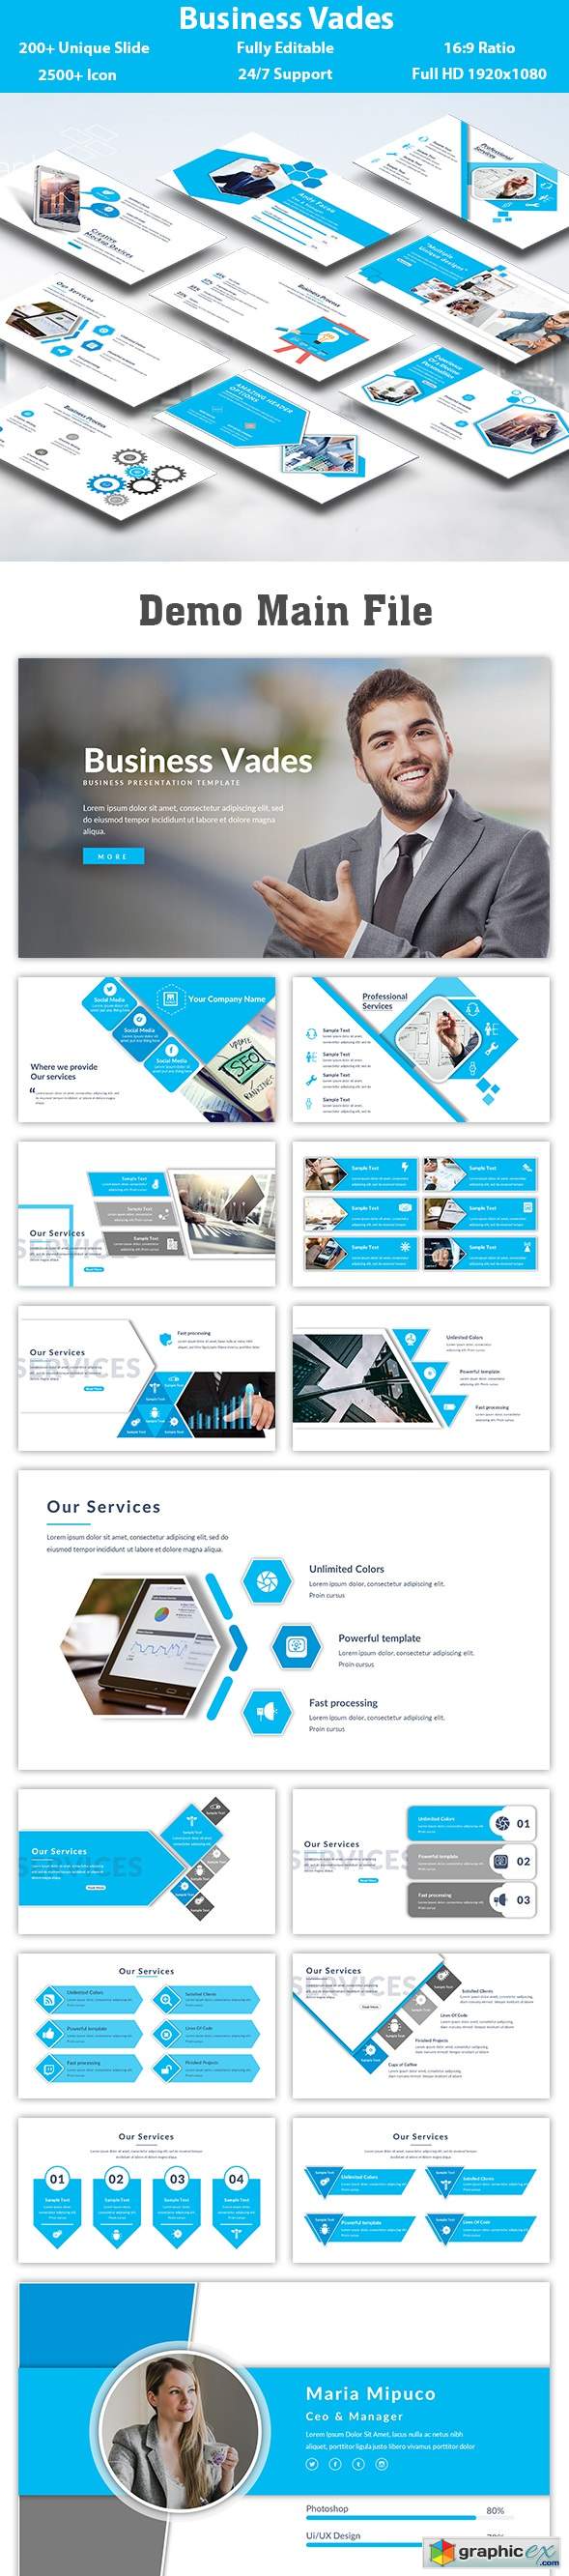 Business Vades Keynote Template